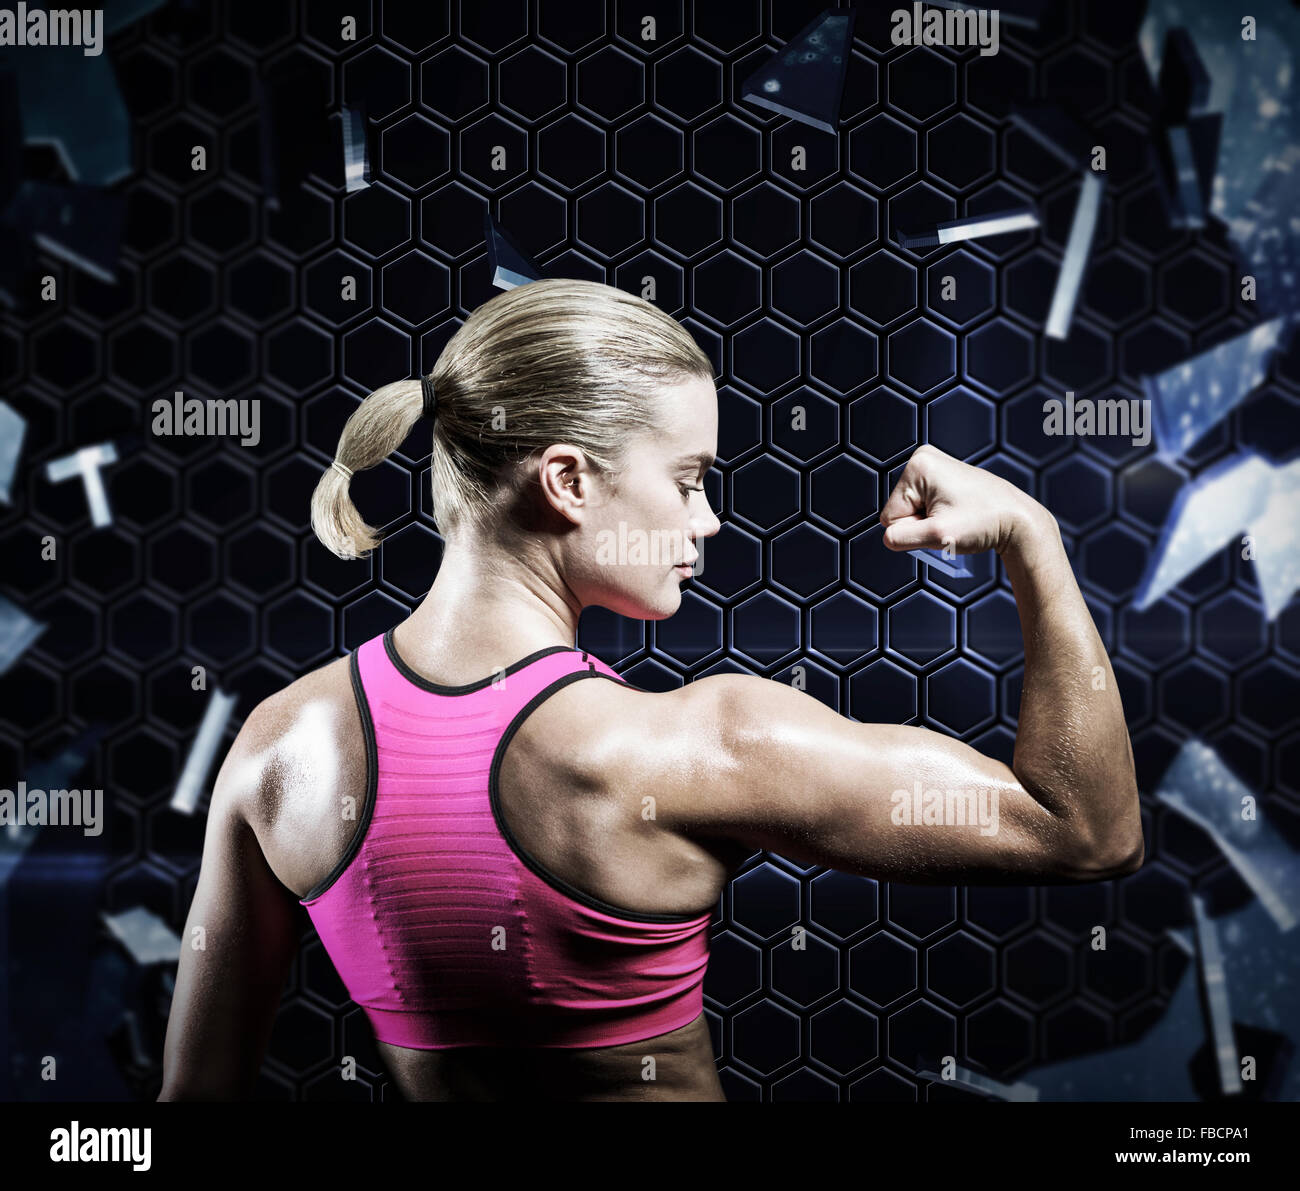 Muscular woman flexing her arm Stock Photo - Alamy